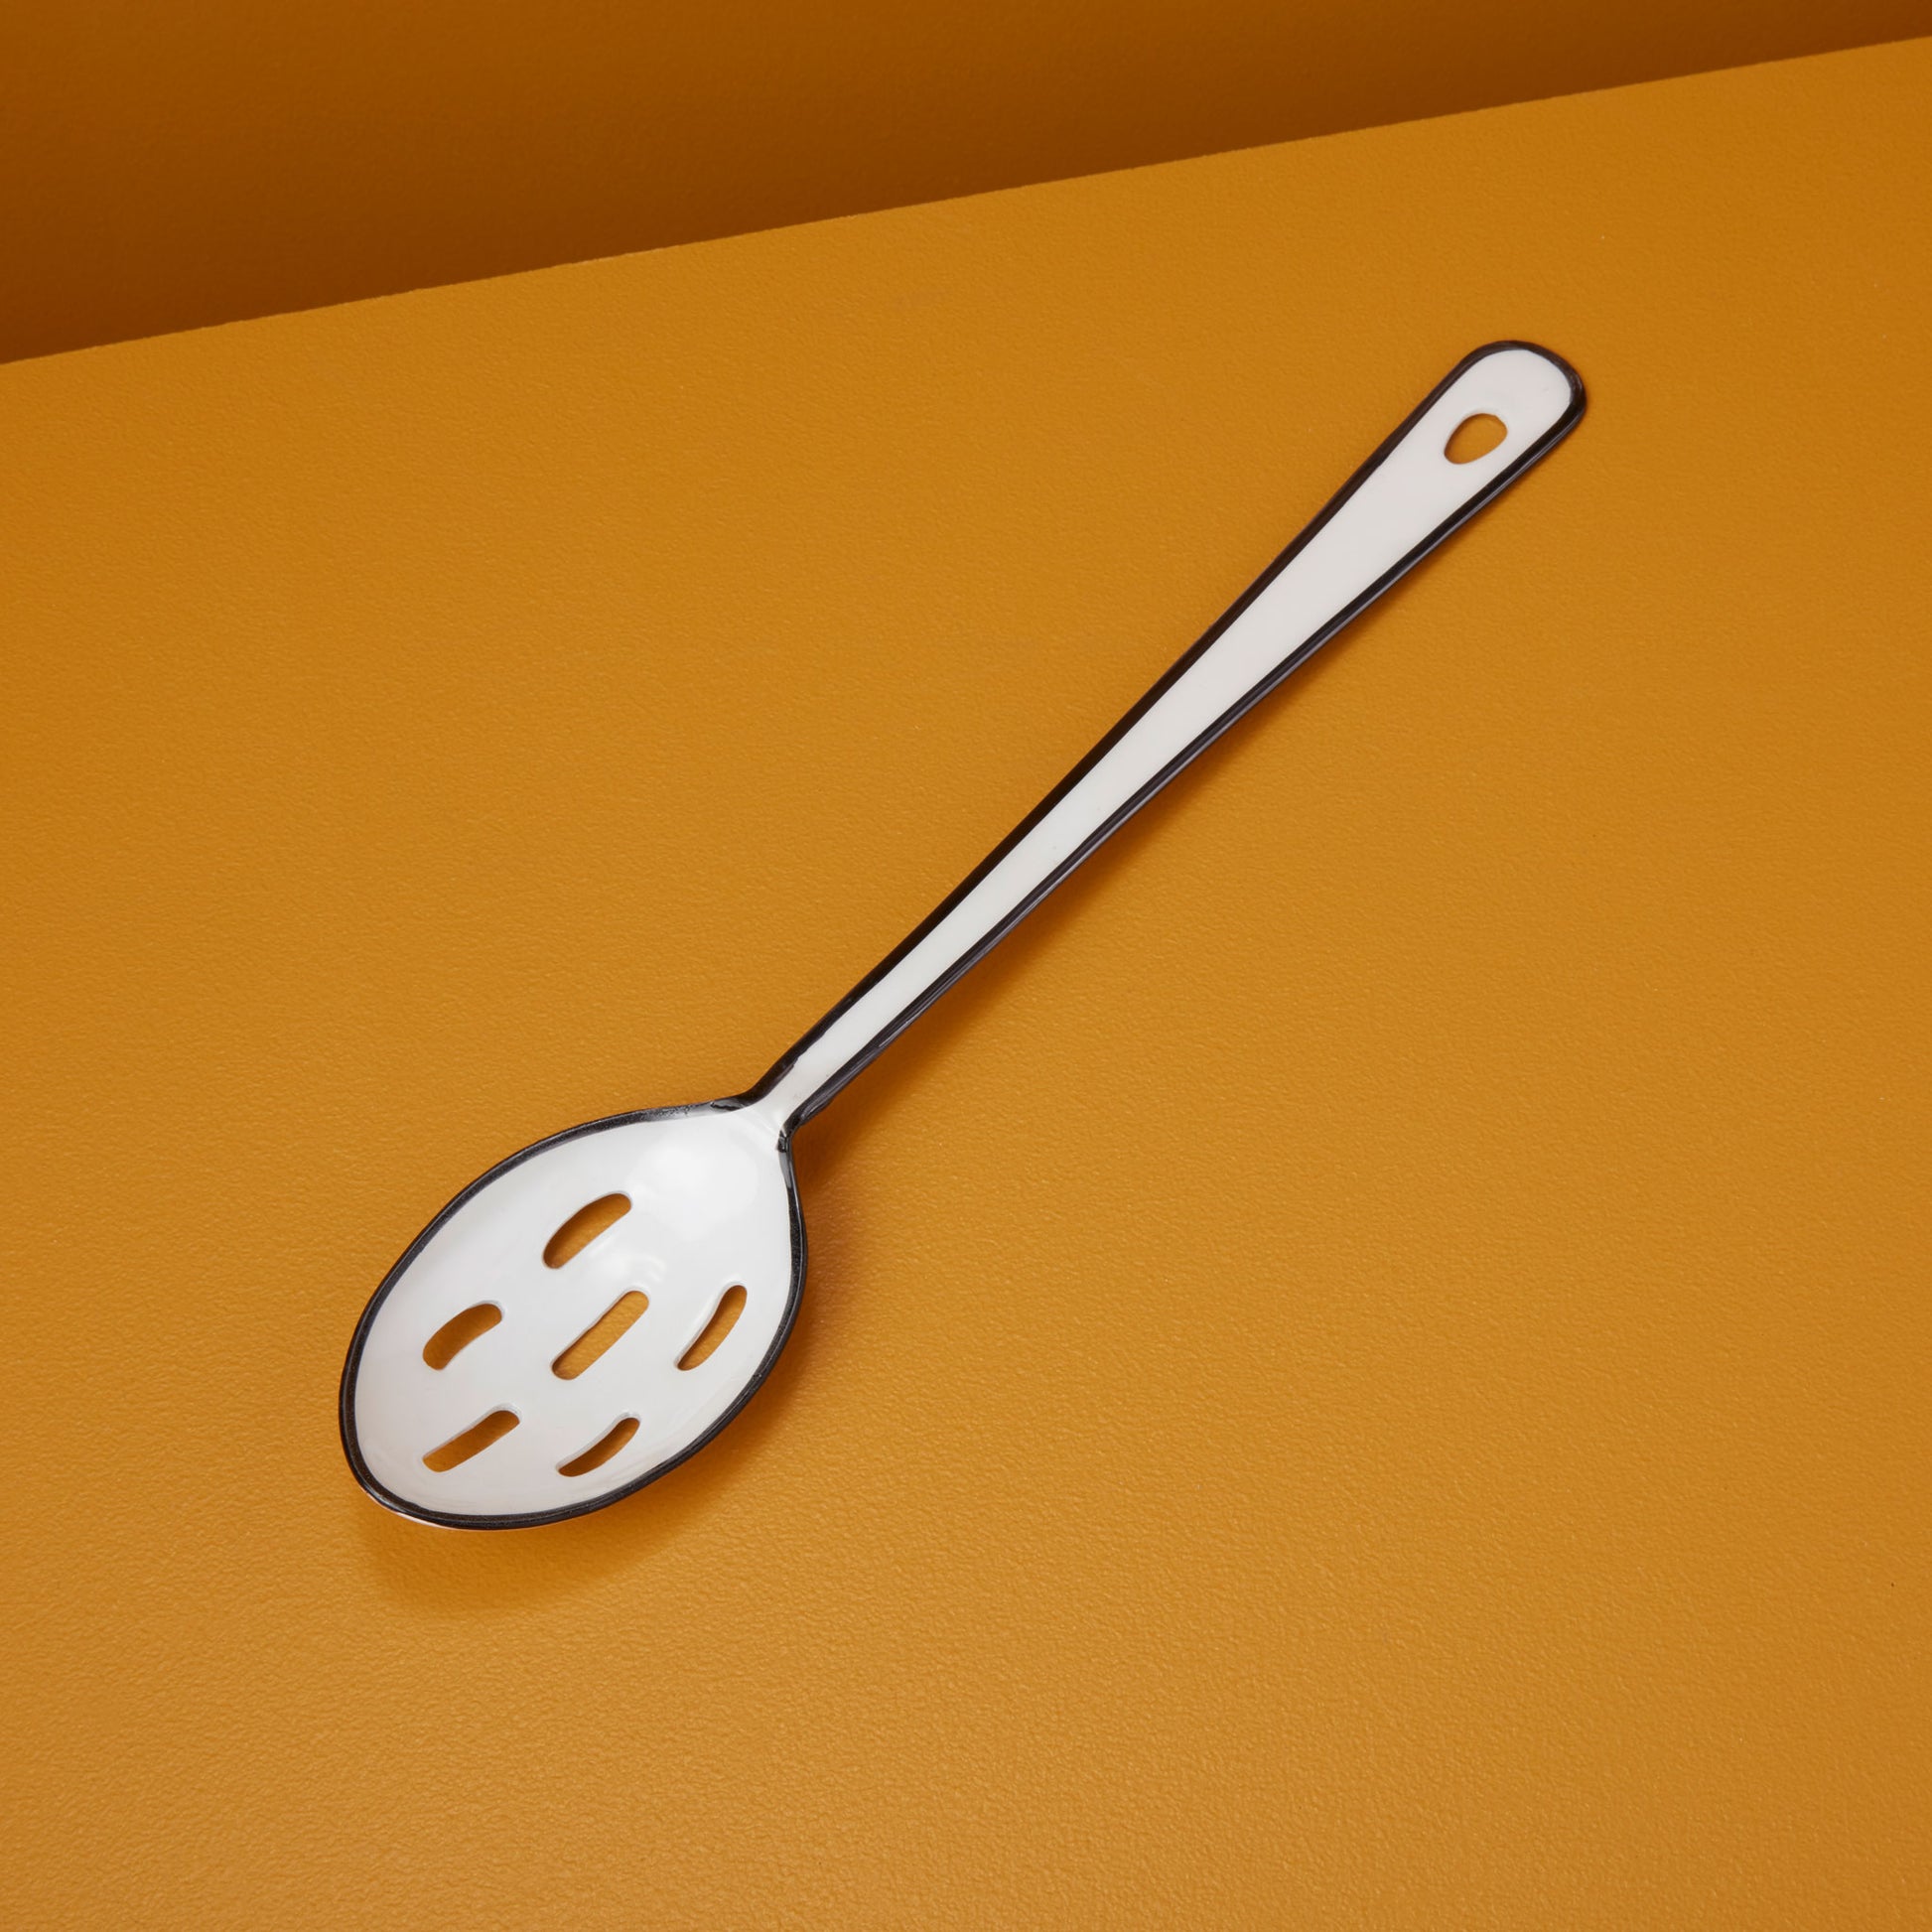 Harvest Slotted Spoon: Practical harvest slotted spoon from Grace Blu Shoppe, perfect for straining and serving food in style.